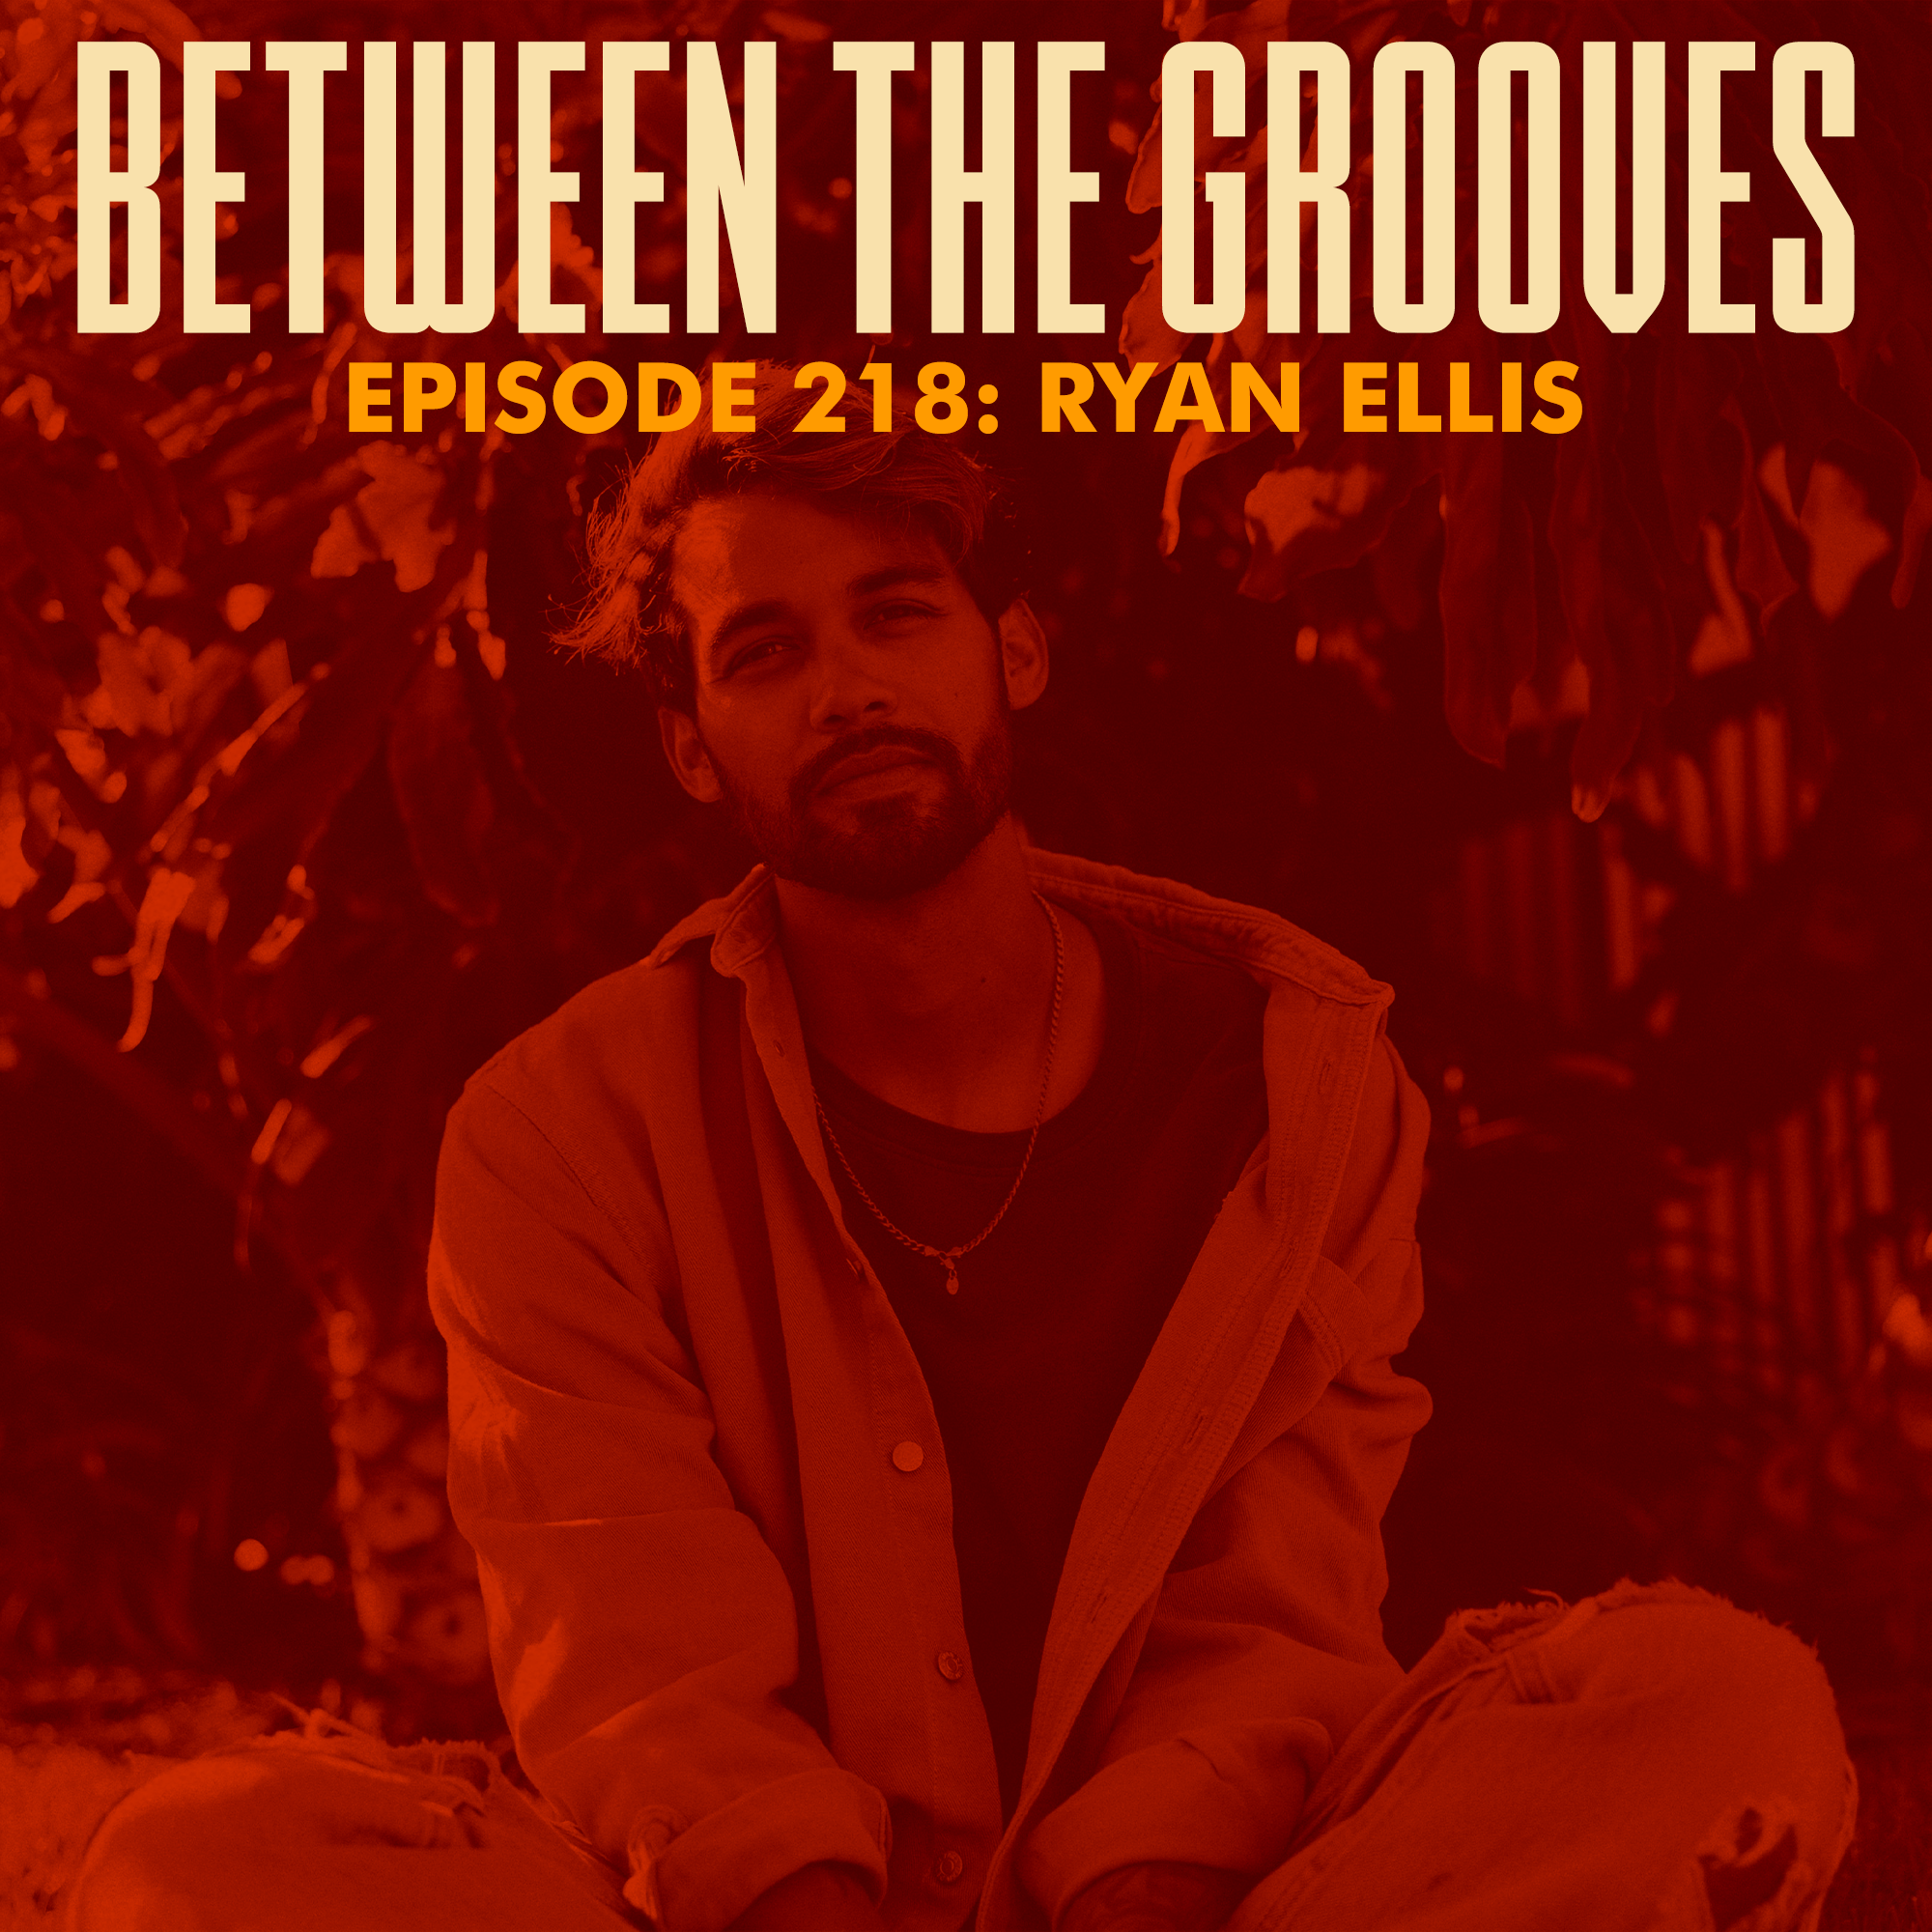 The Greatest Give with Ryan Ellis